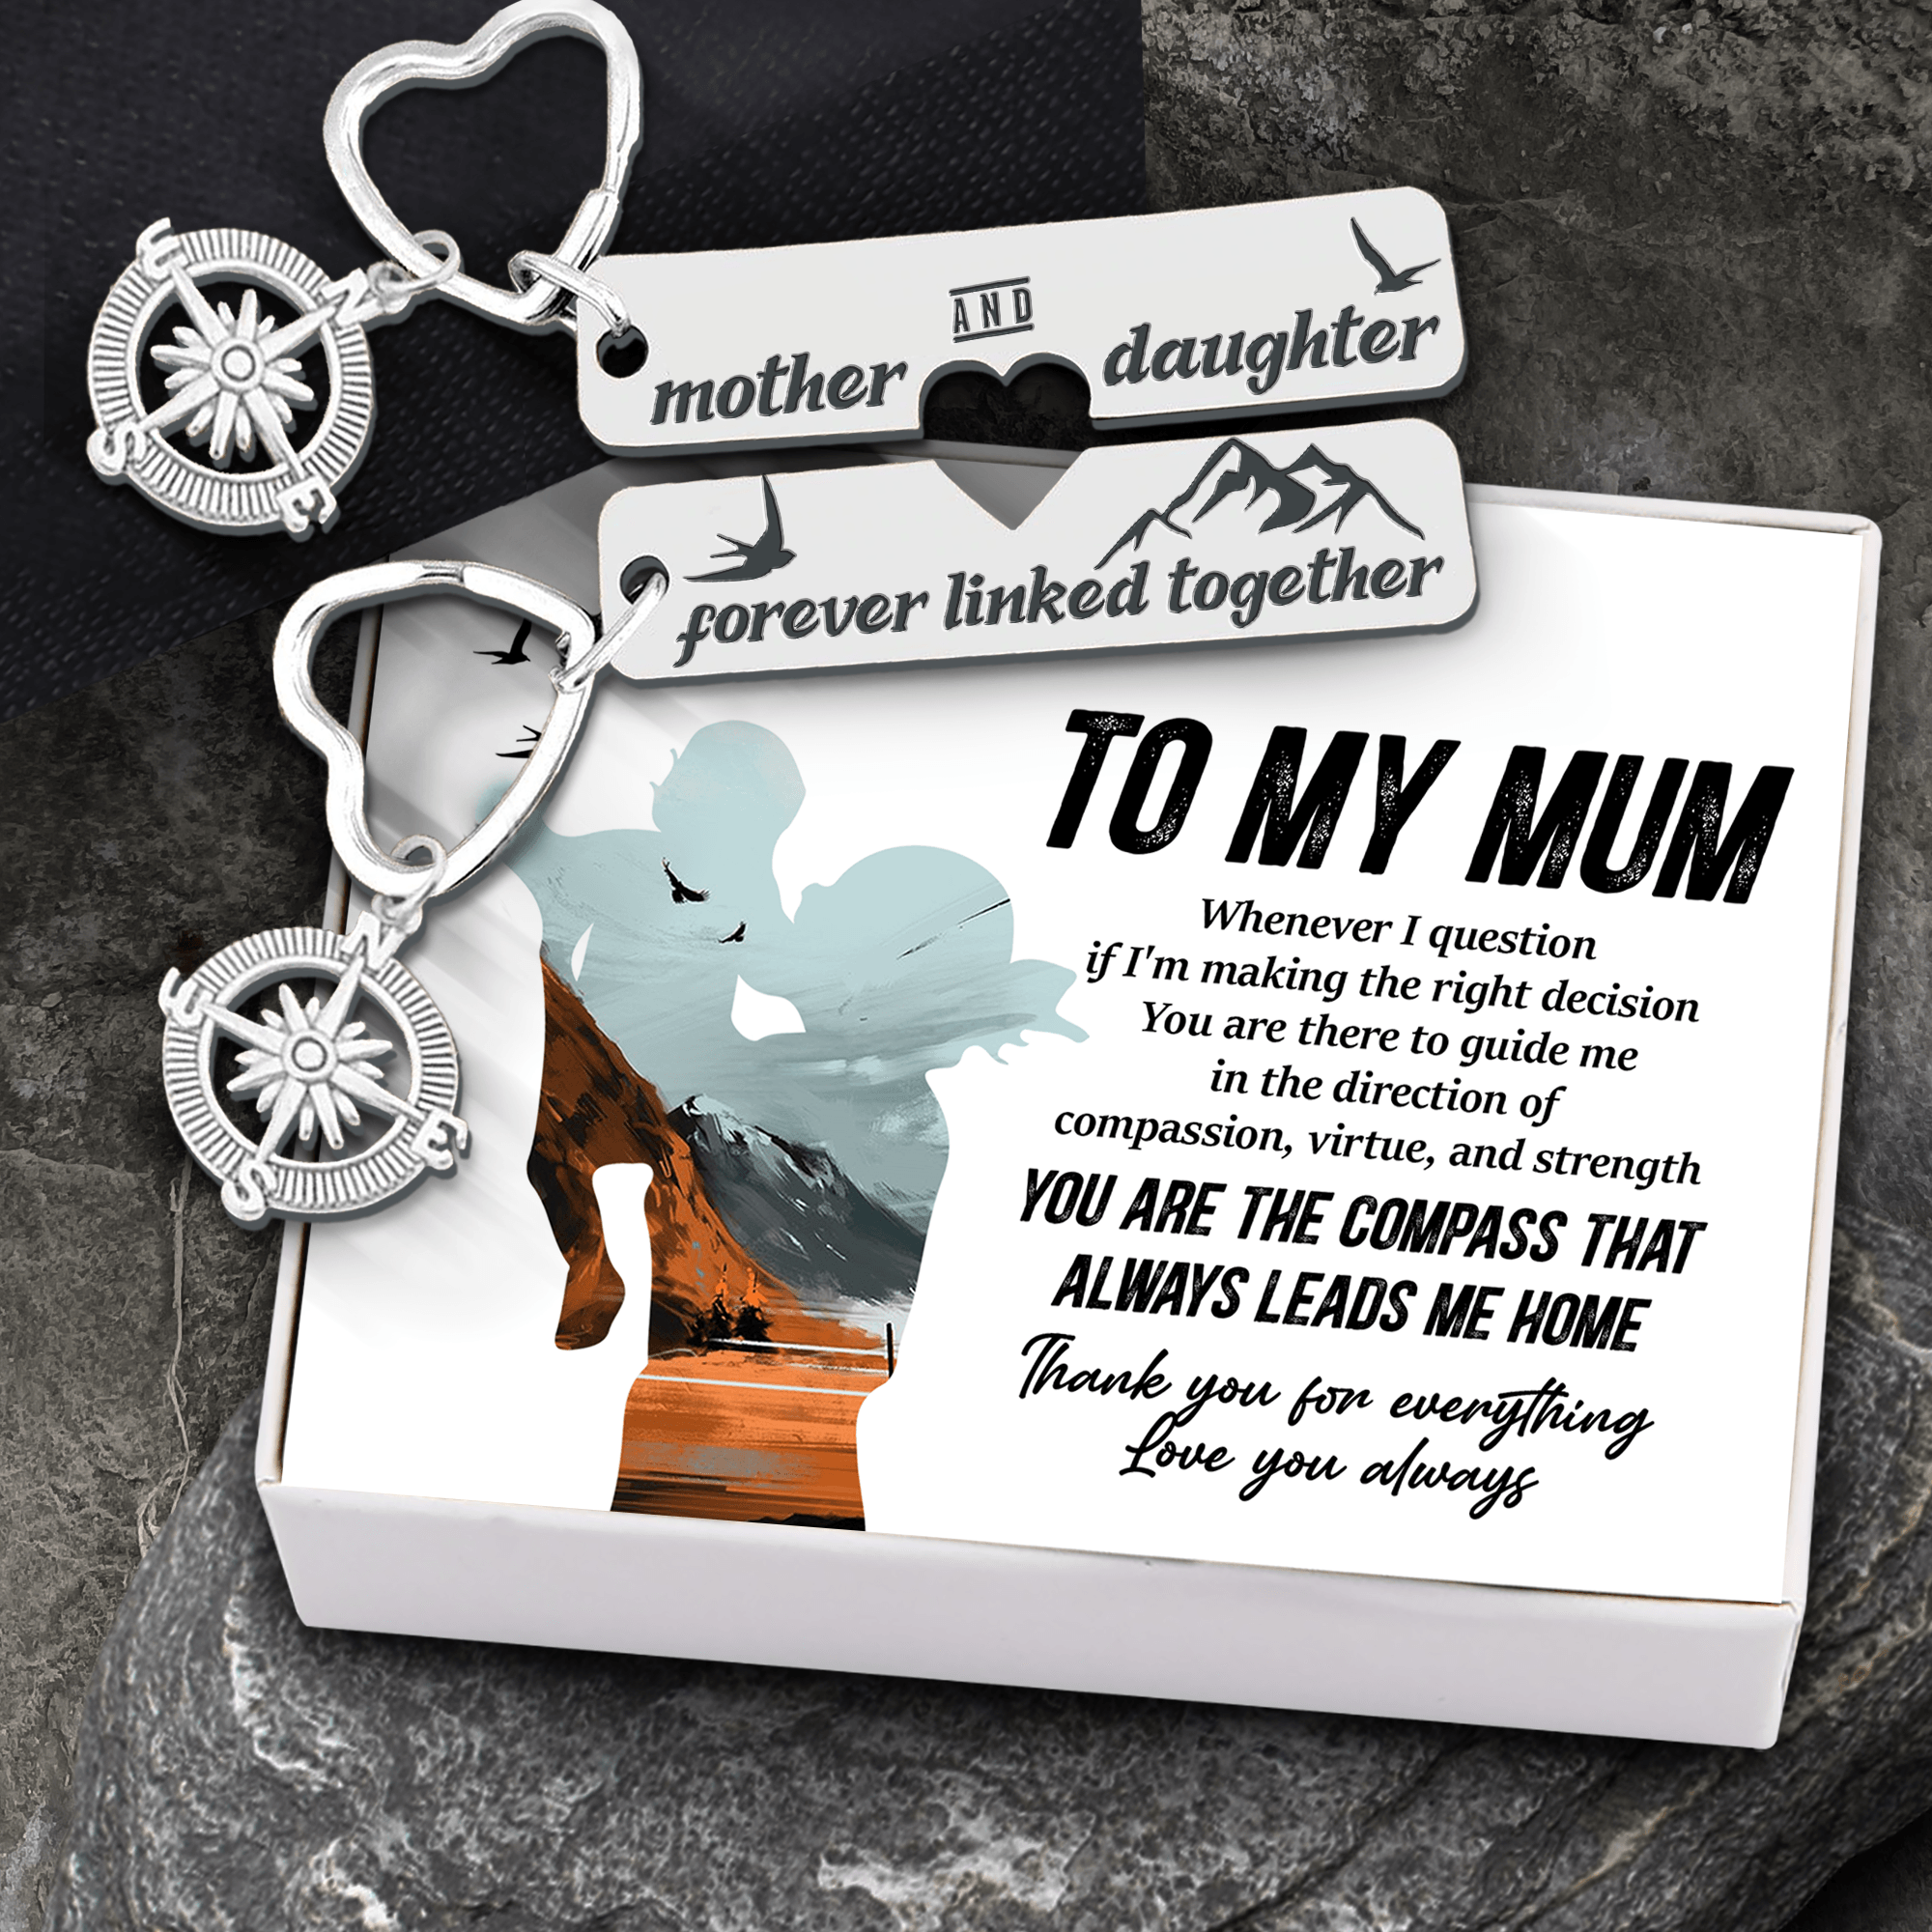 Compass Heart Couple Keychains - Hiking - To My Mum - You Are There To Guide Me - Augkdq19003 - Gifts Holder